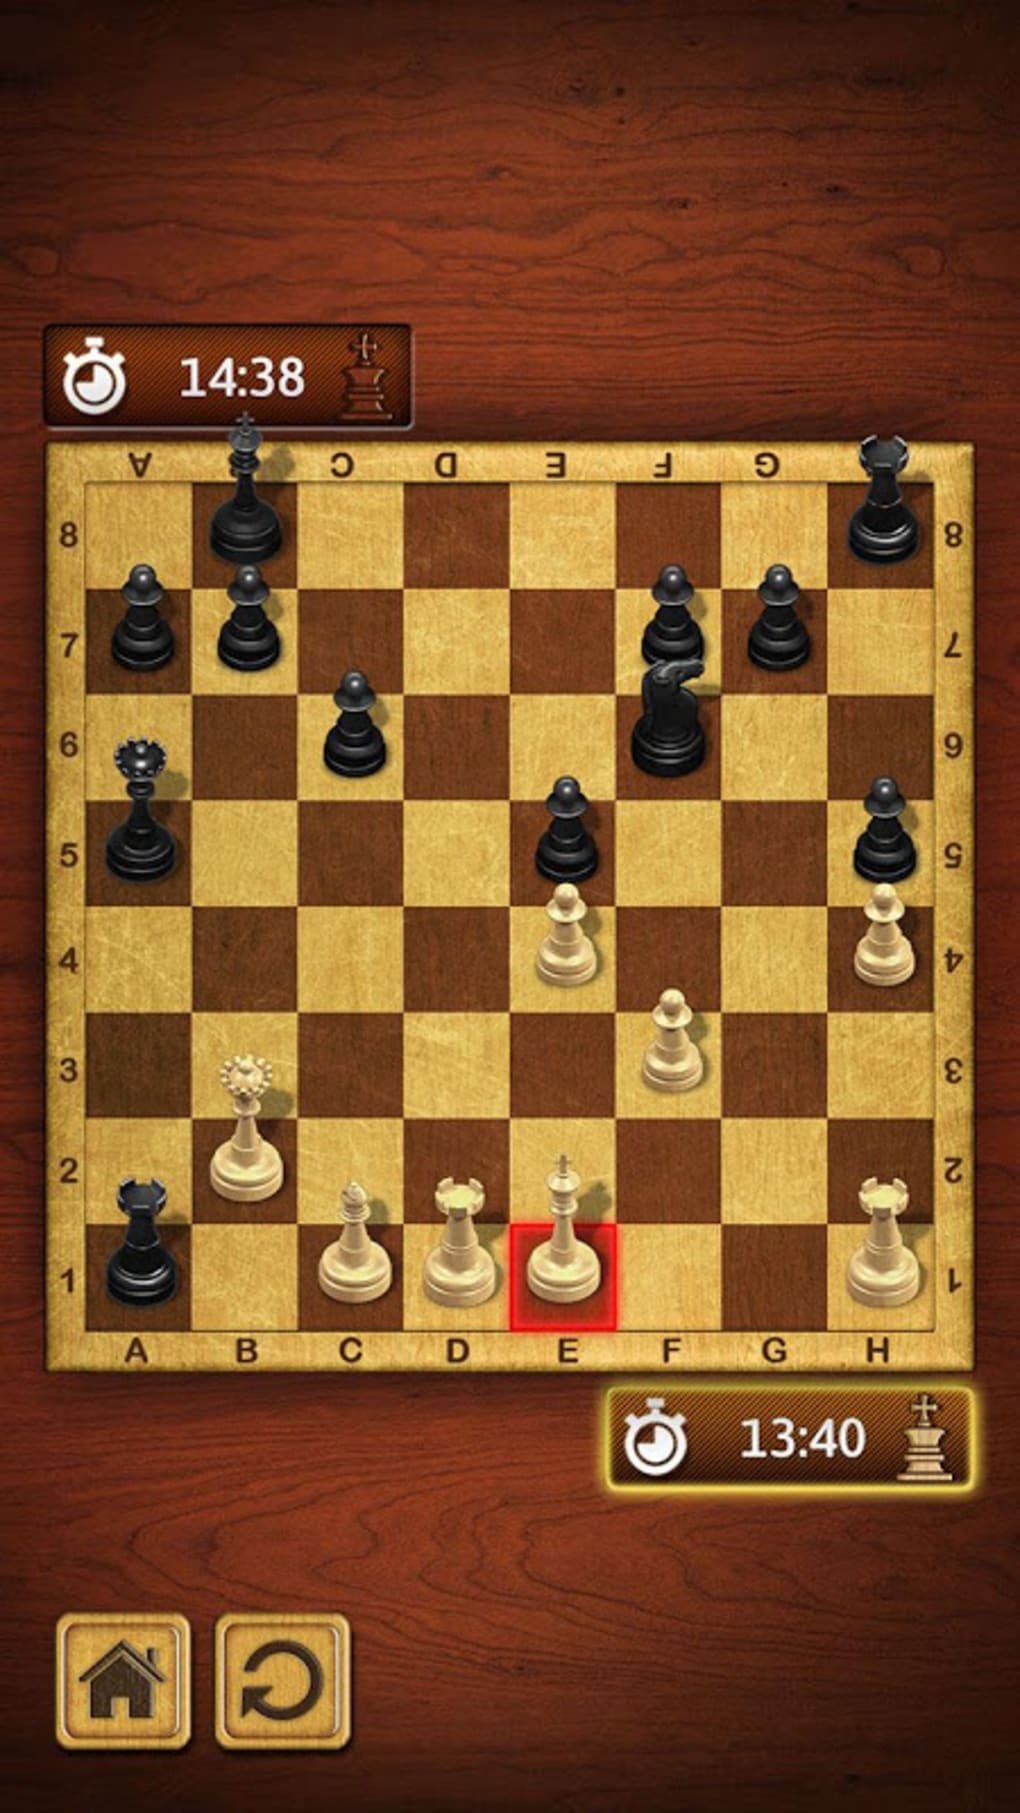 Chess Master King for Android - Free App Download